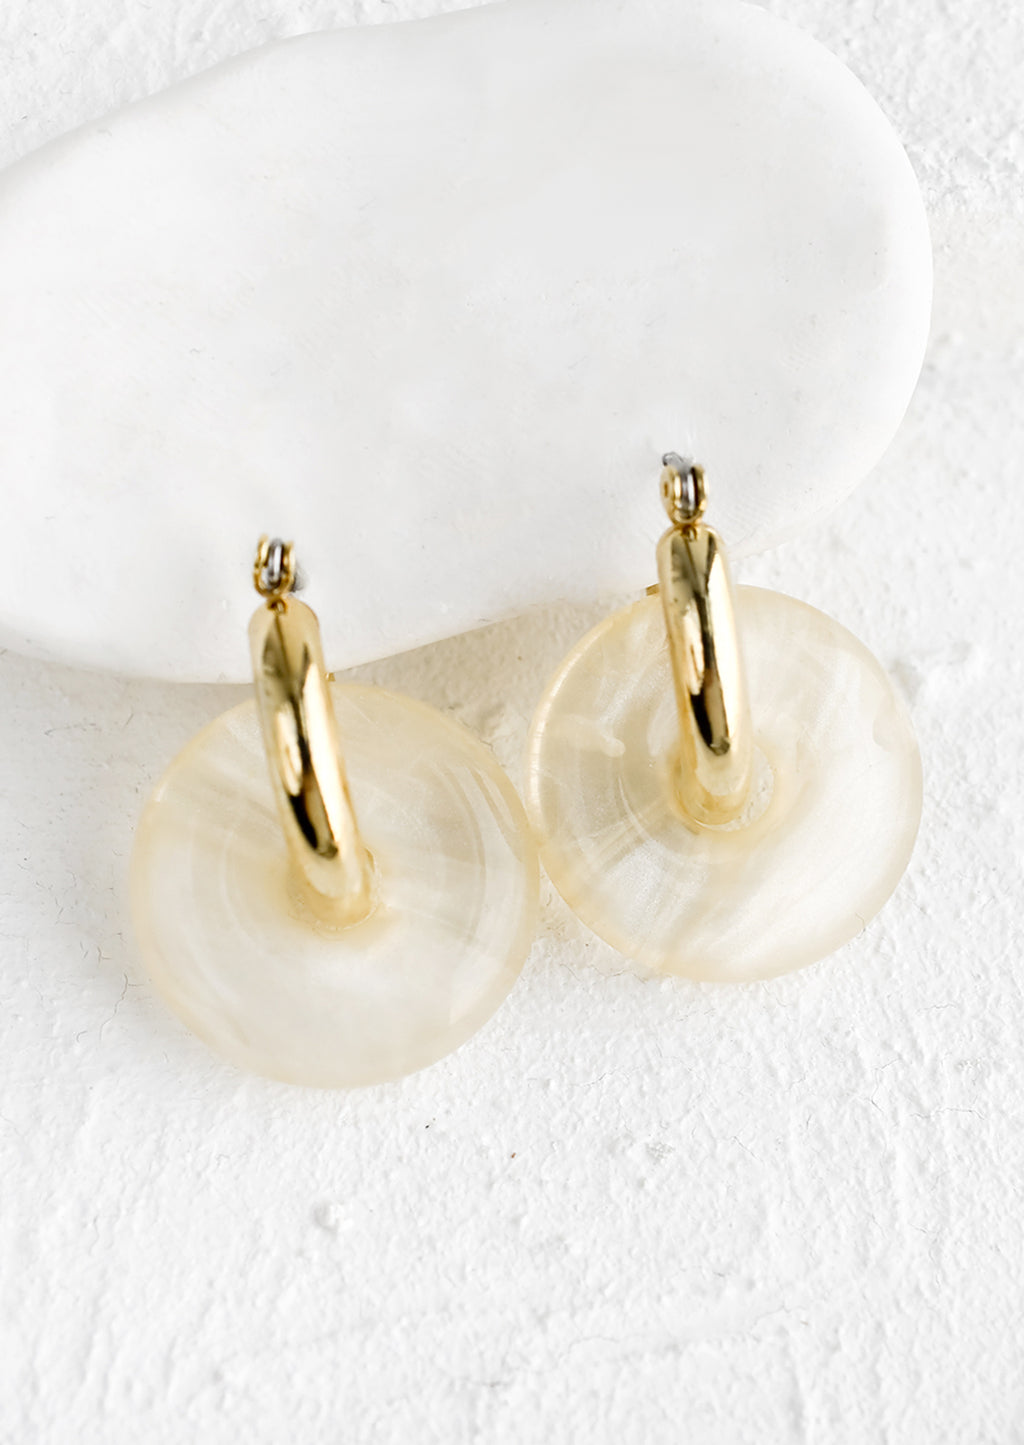 Sugar: A pair of clear resin donut shaped charms on gold hoop earrings.